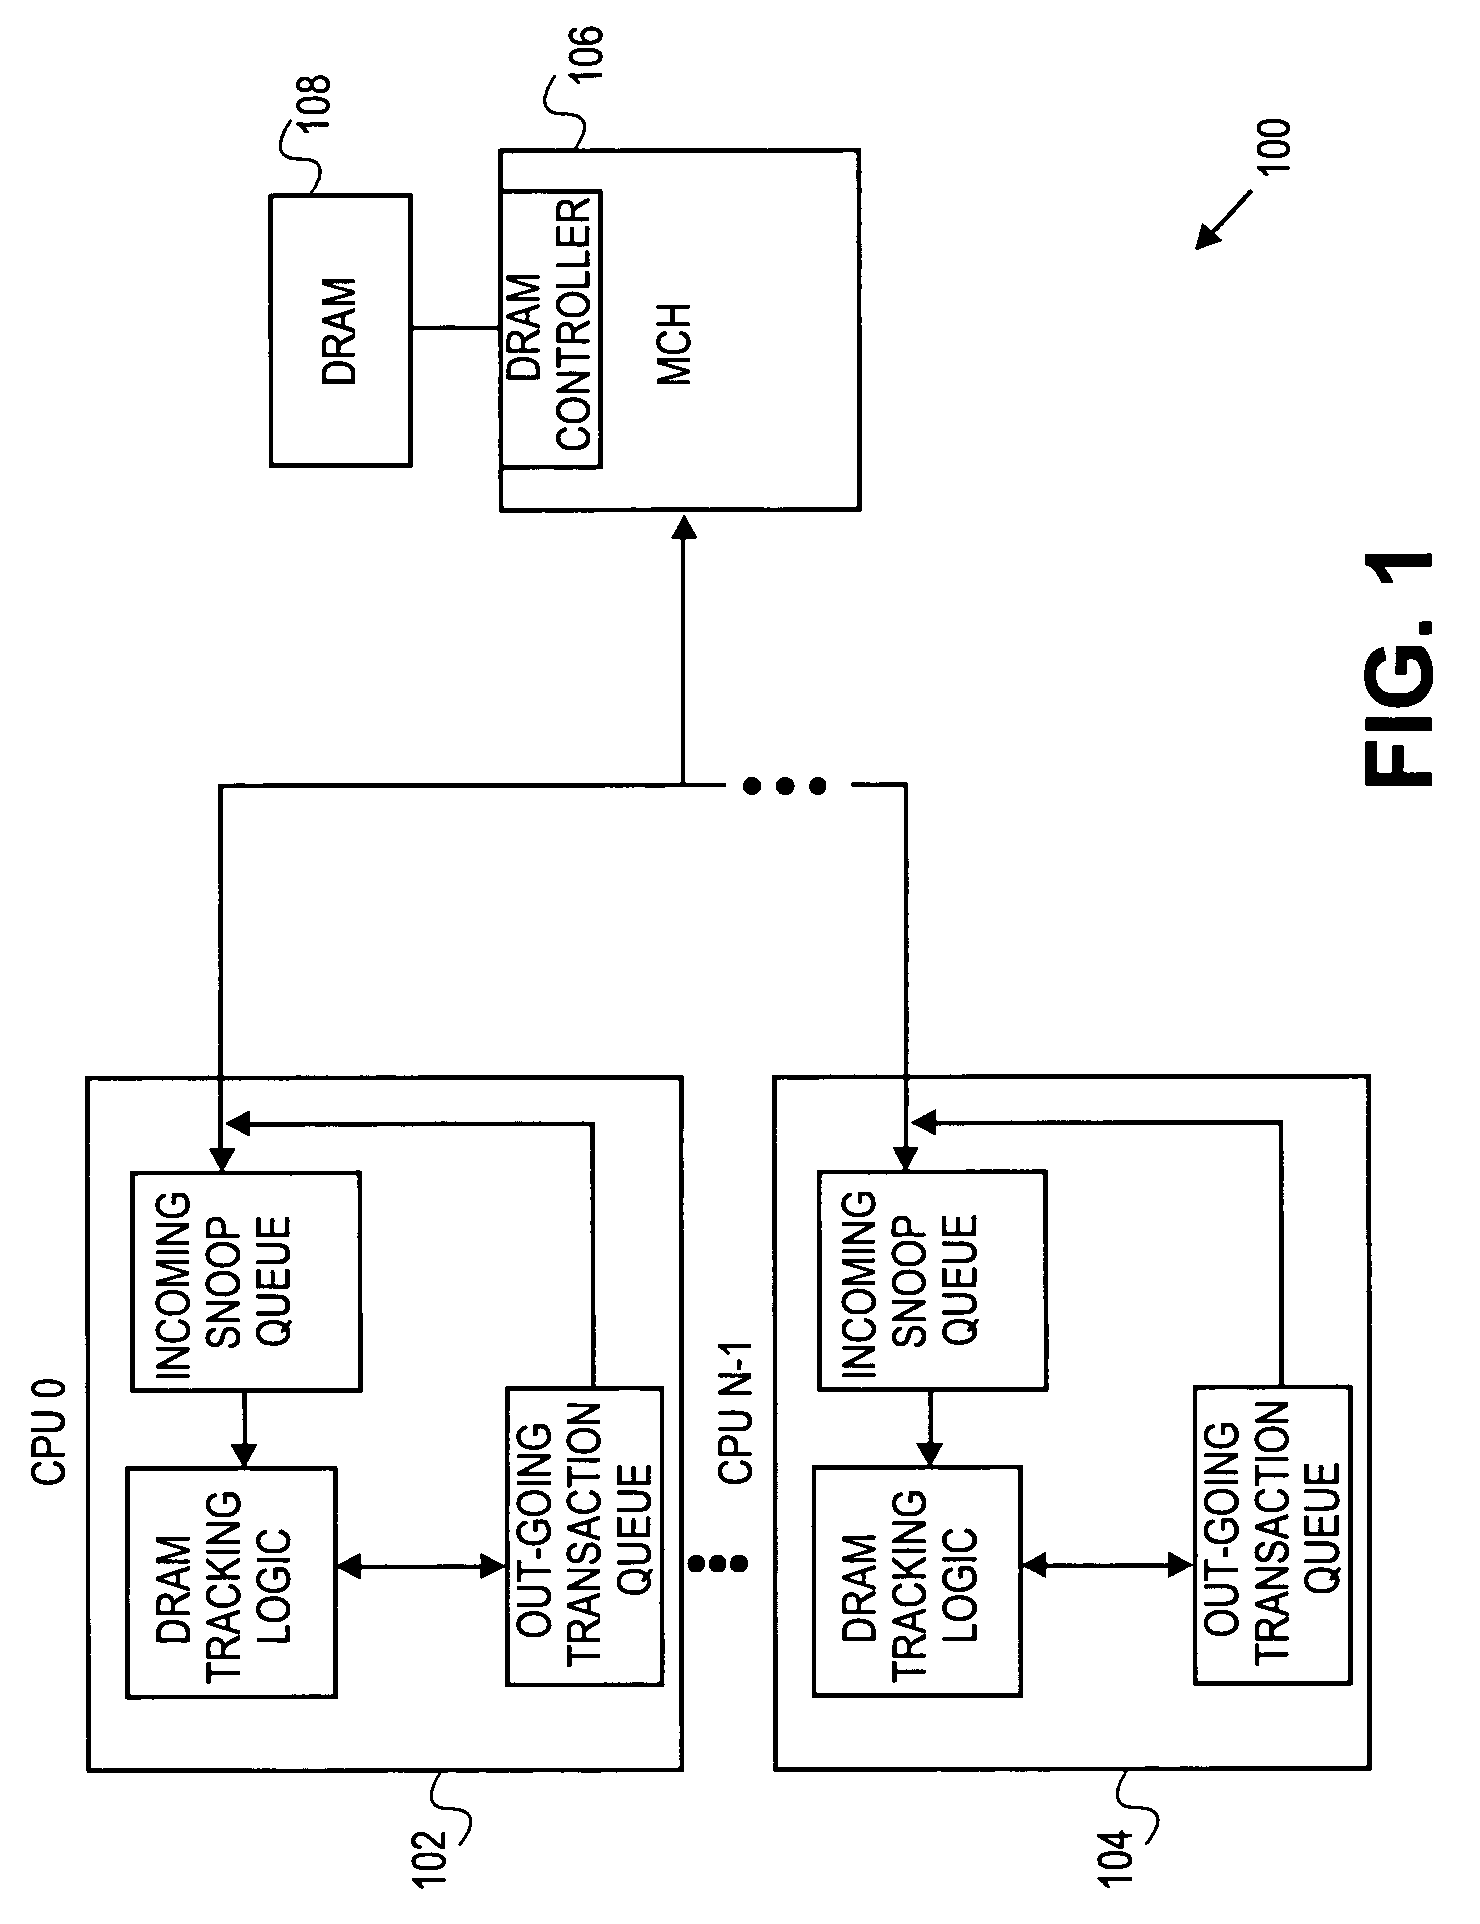 Method and apparatus to improve multi-CPU system performance for accesses to memory